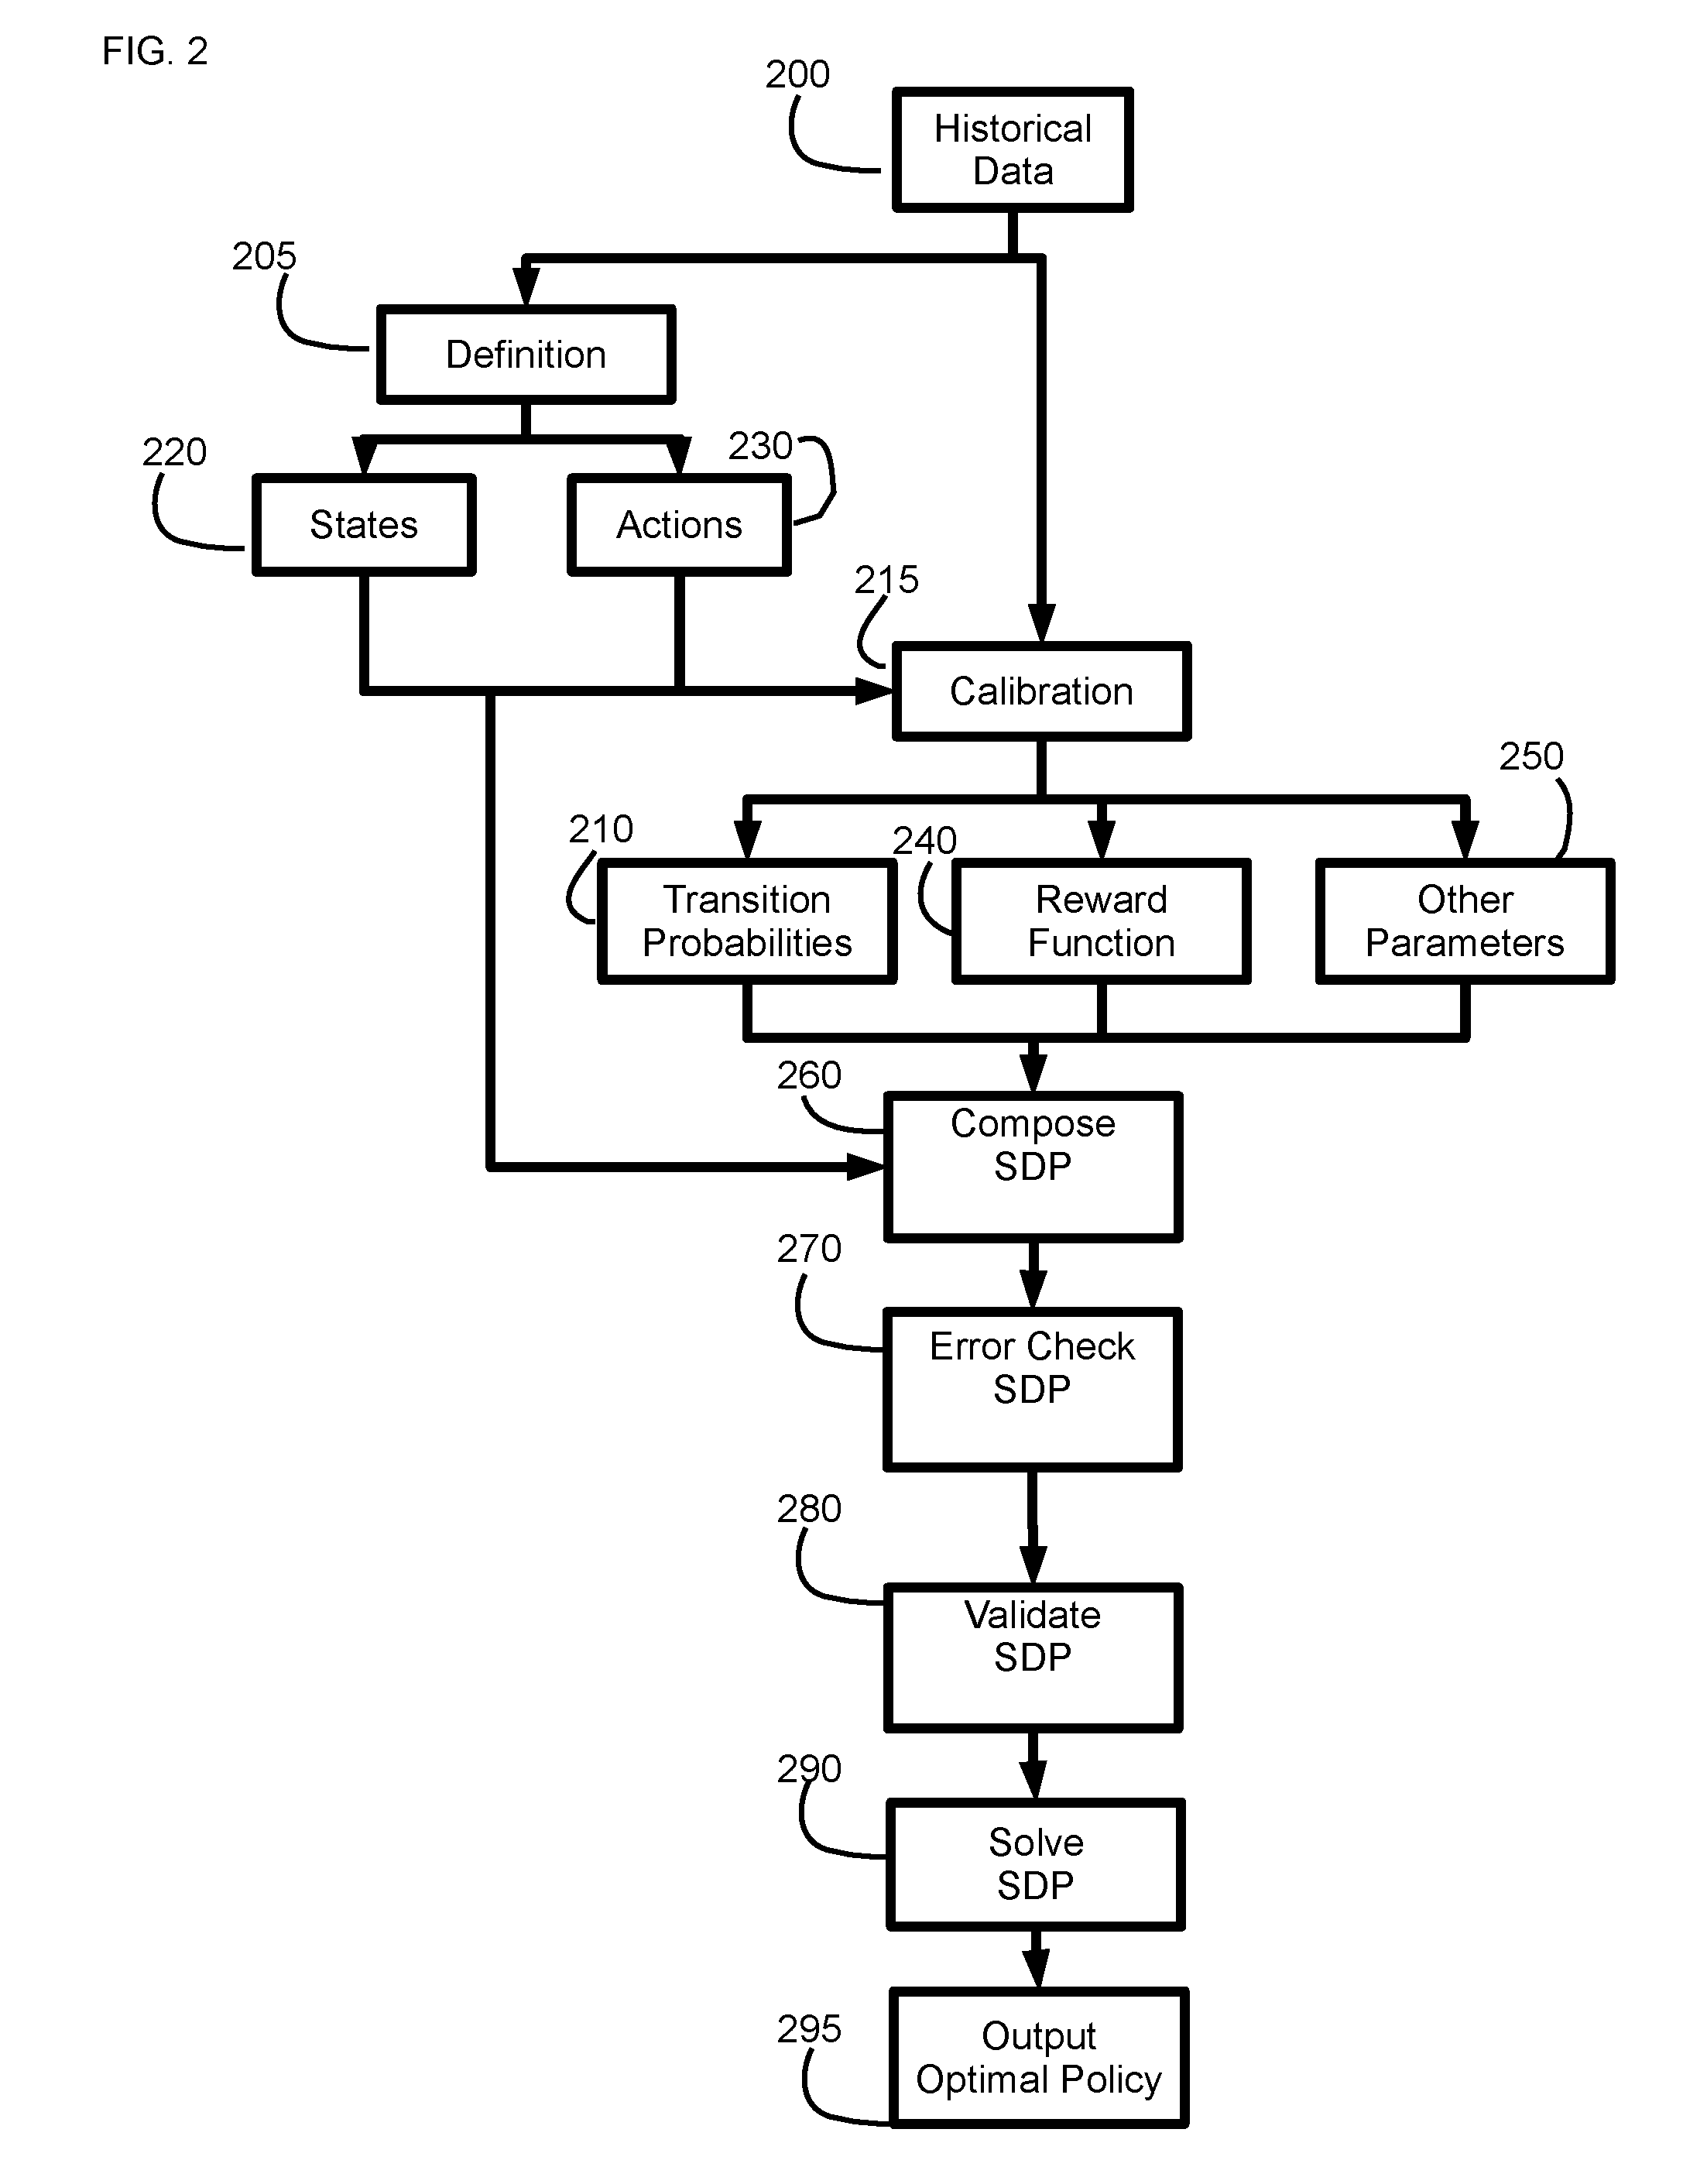 System and Method for Defining and Calibrating a Sequential Decision Problem using Historical Data